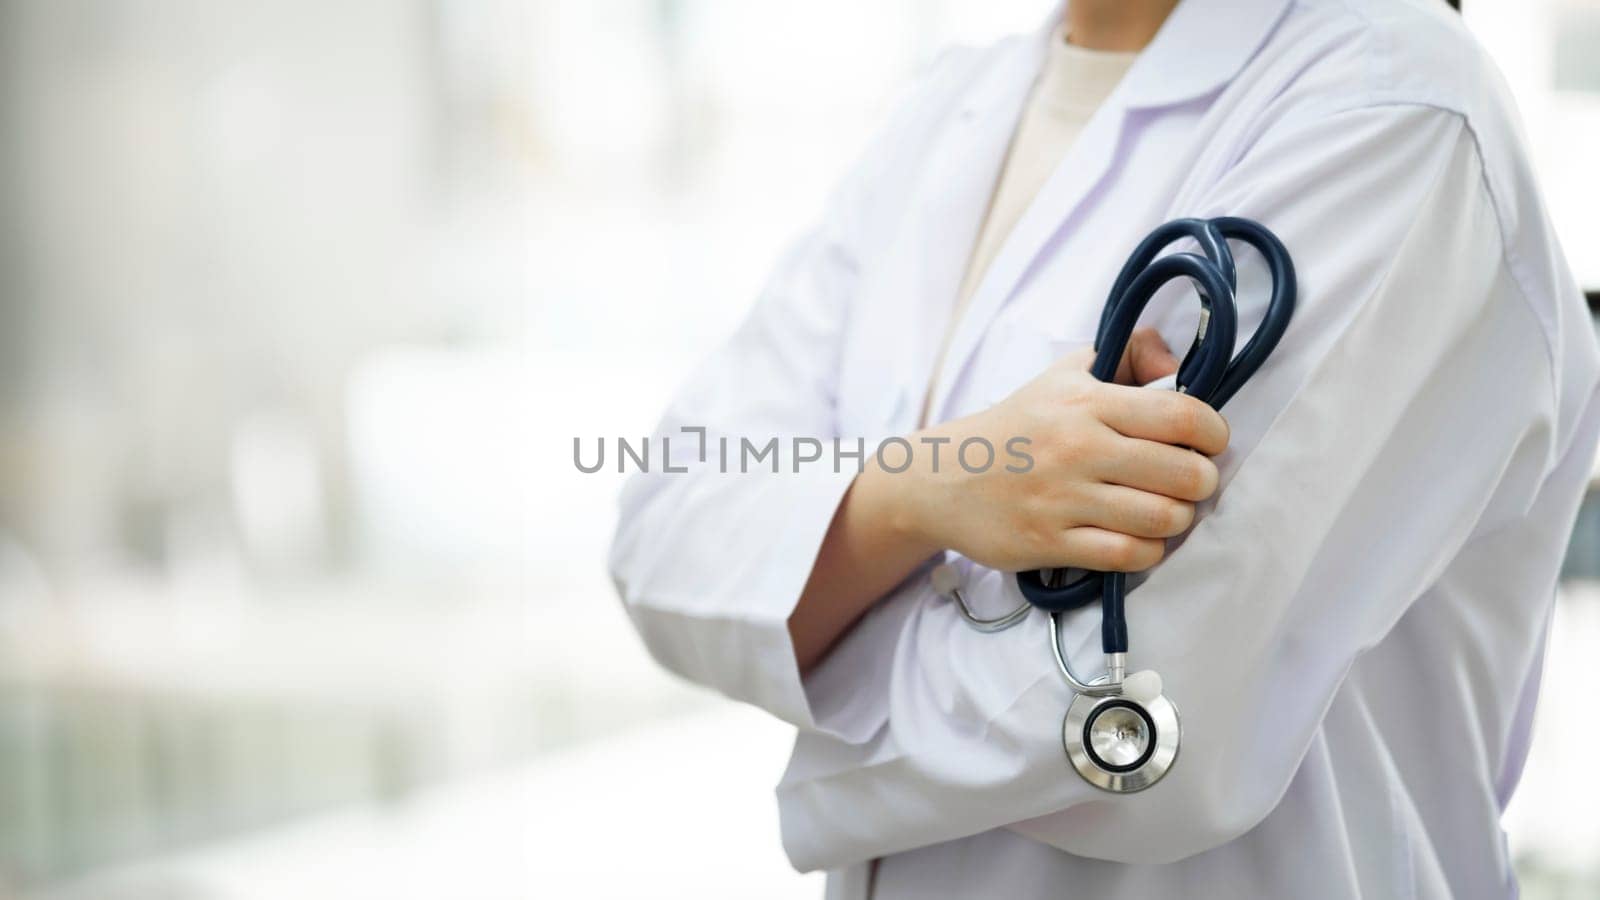 Copy space. medicine doctor holding stethoscope in hand wearing medical gown standing. by ijeab